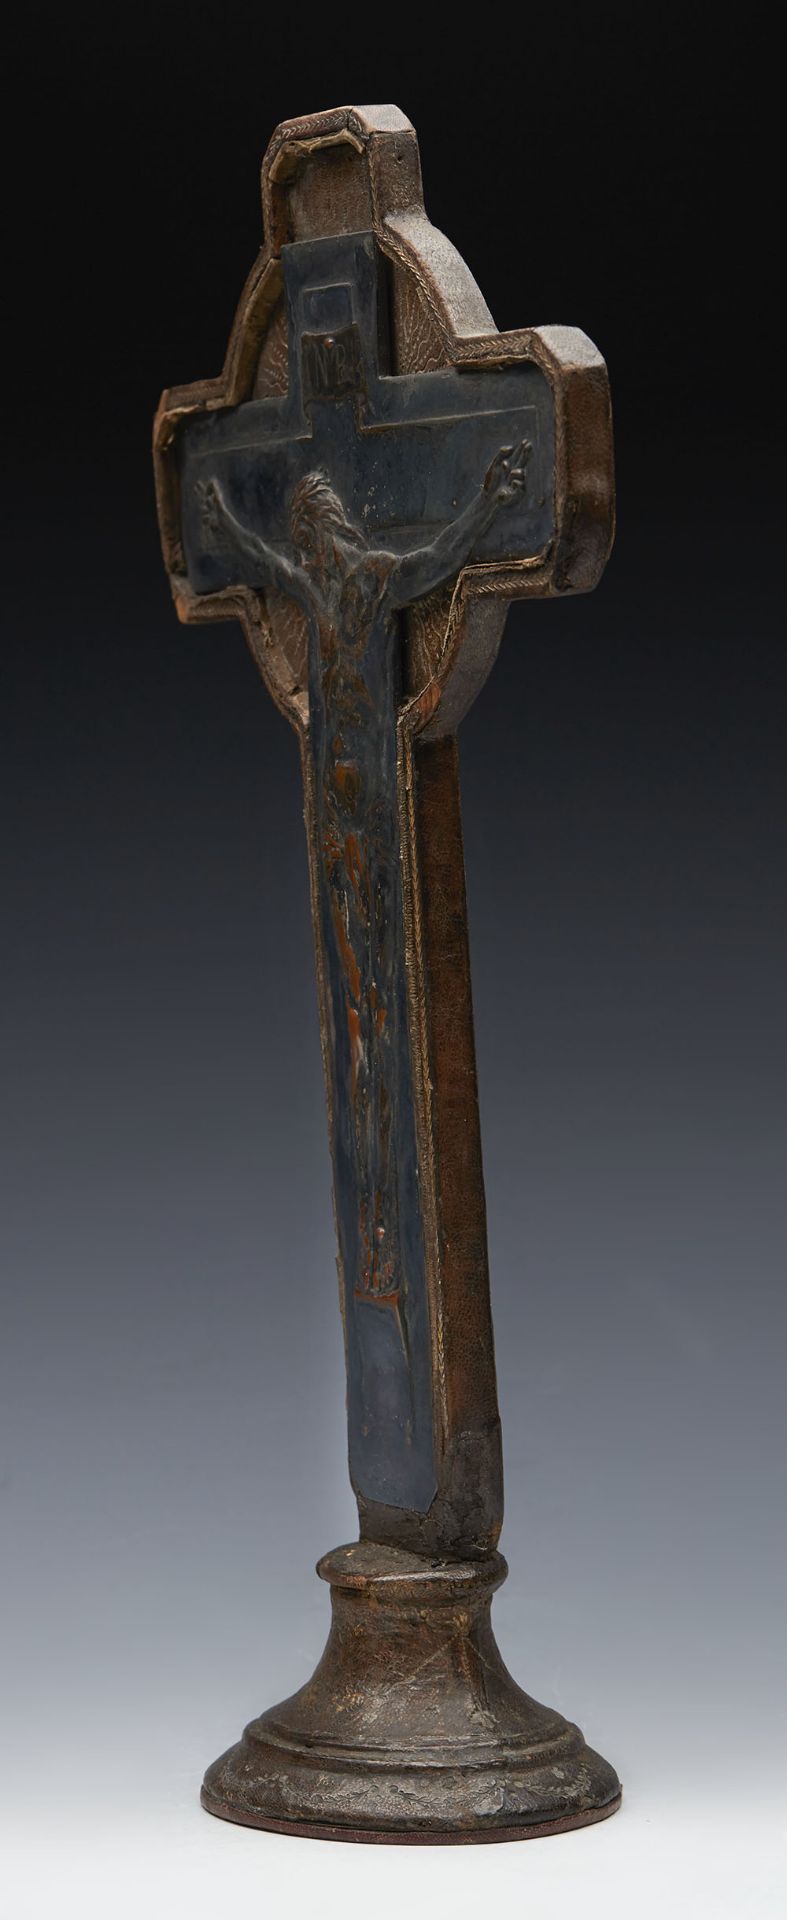 Antique French Crucifix By Jules-Prosper Legastelois Early 20Th C. - Image 8 of 11